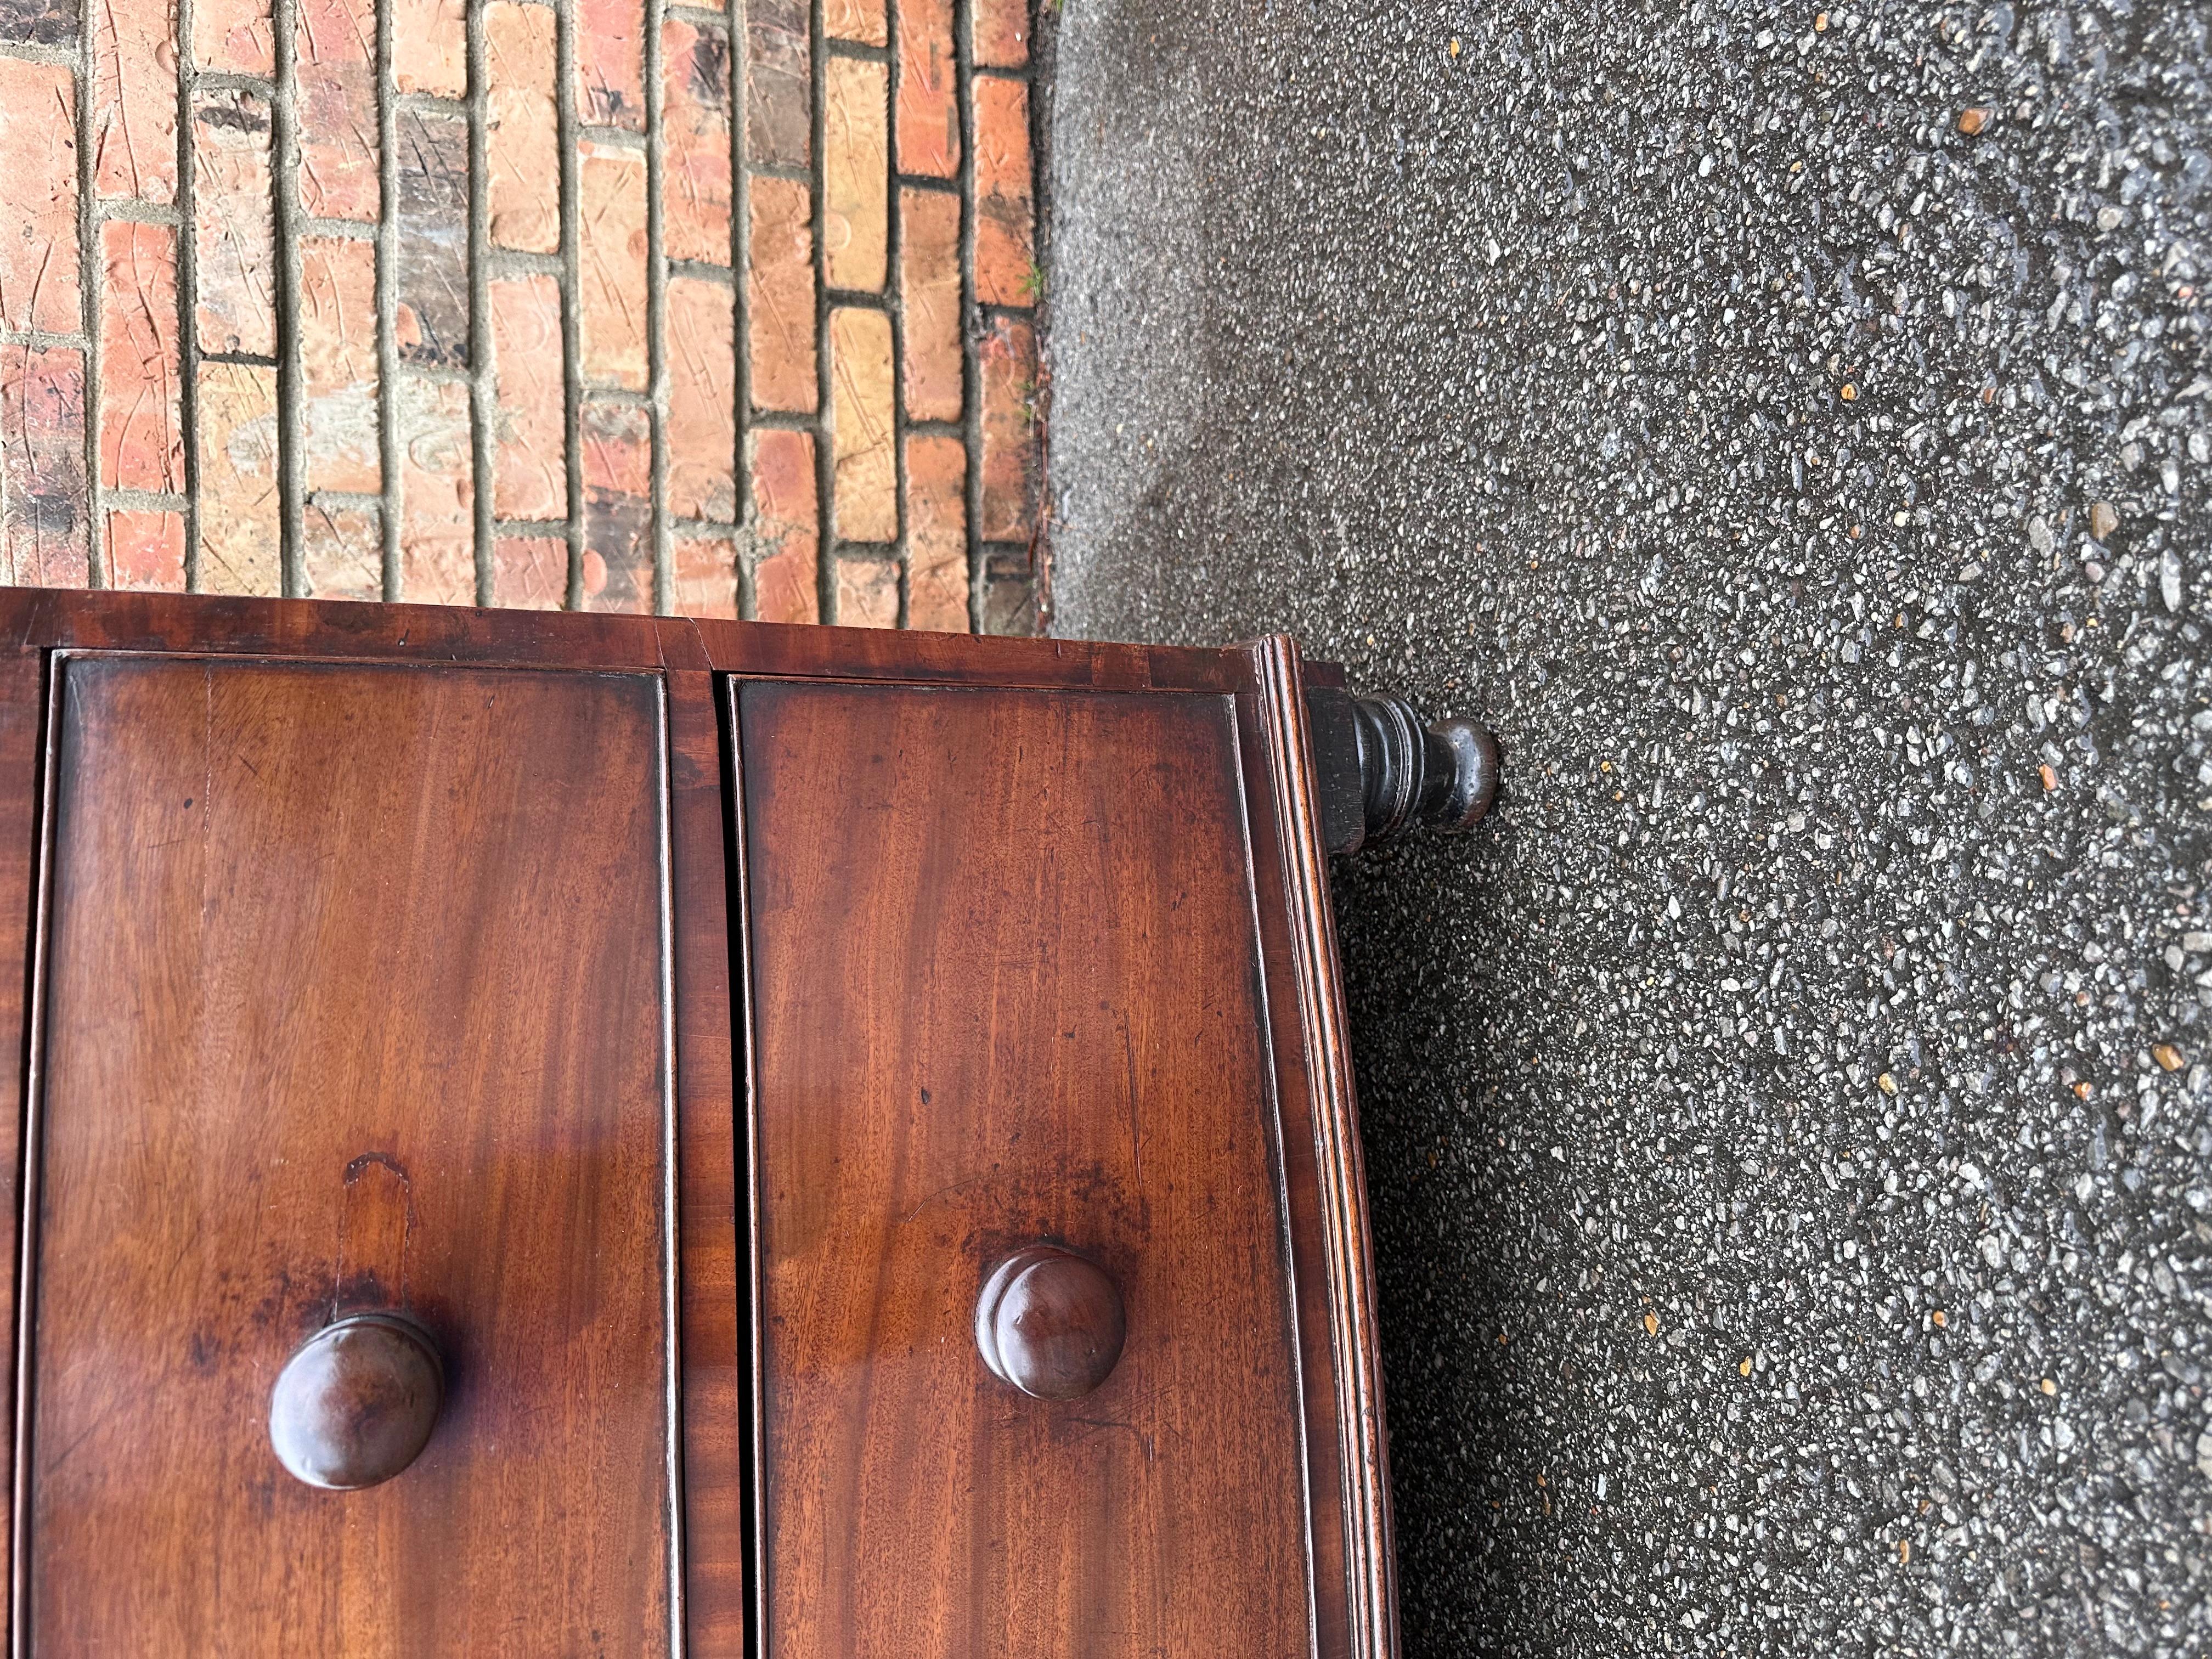 This is a beautiful English bow front chest. Dating to the 19th century this piece is still in excellent condition with stunning patina and such a smooth glossy finish. This chest is two over three with all drawers being spacious and smoothly